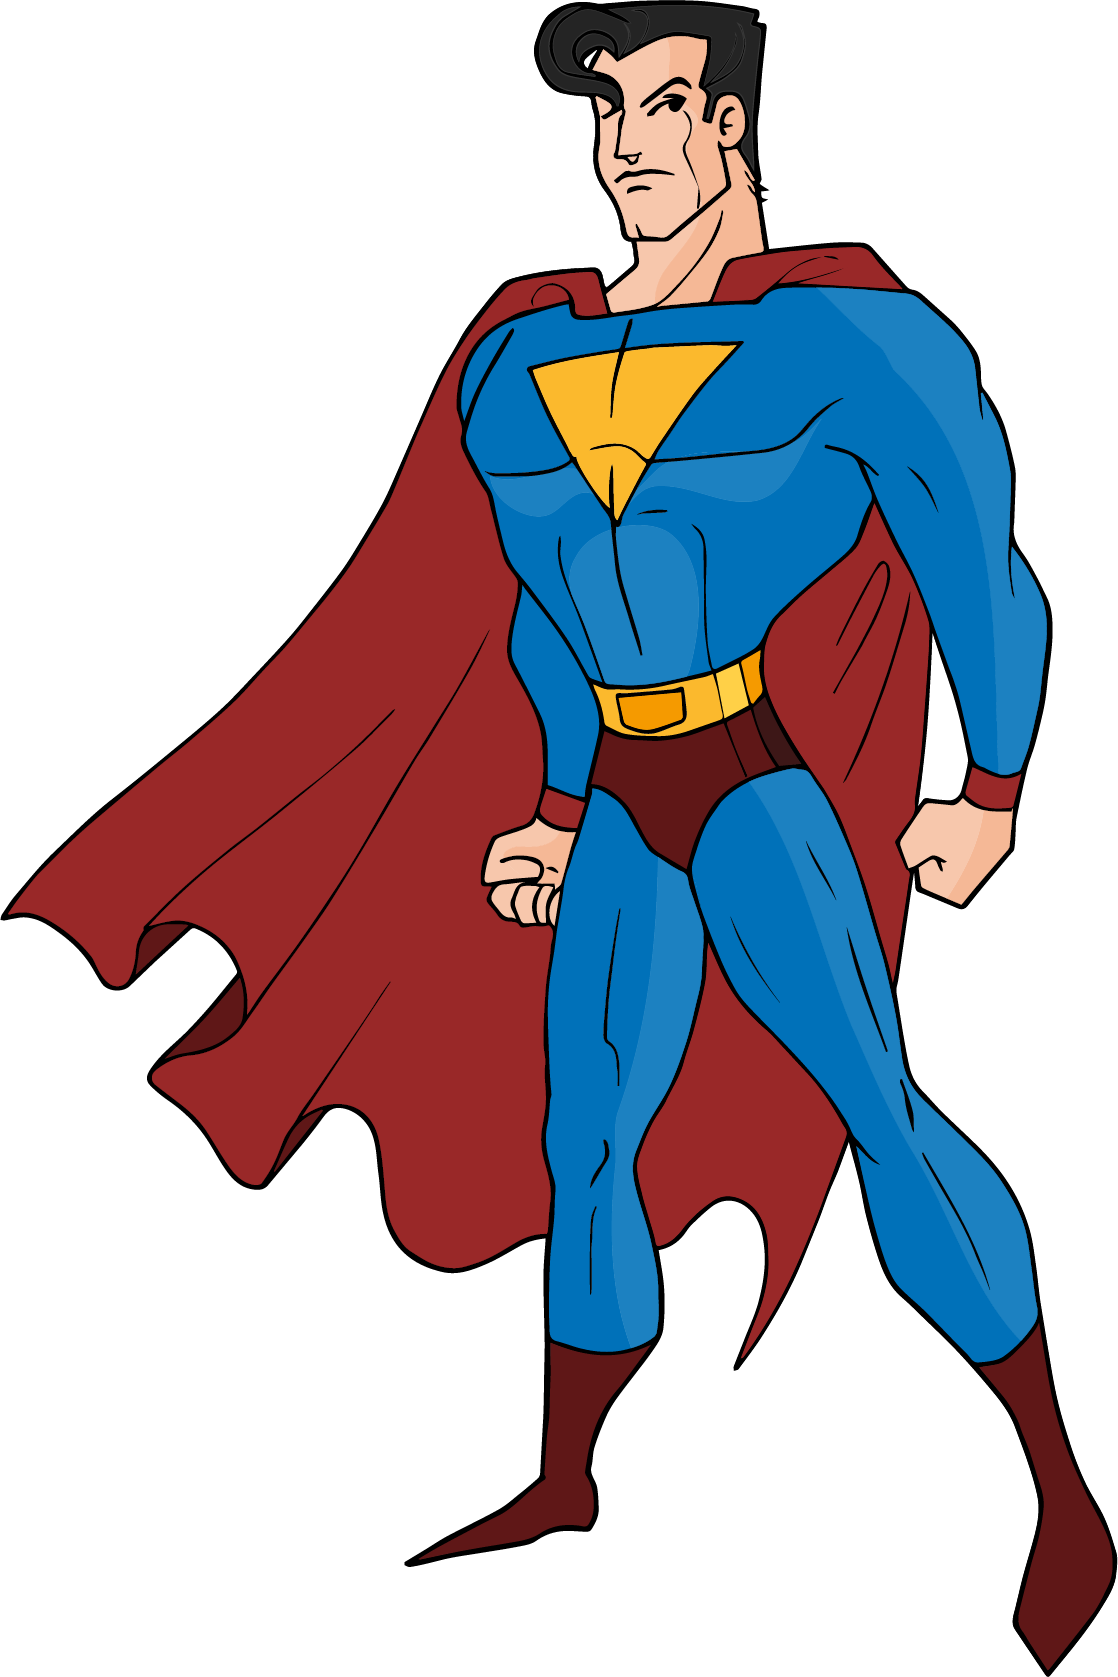 Superman images facts about only clip art